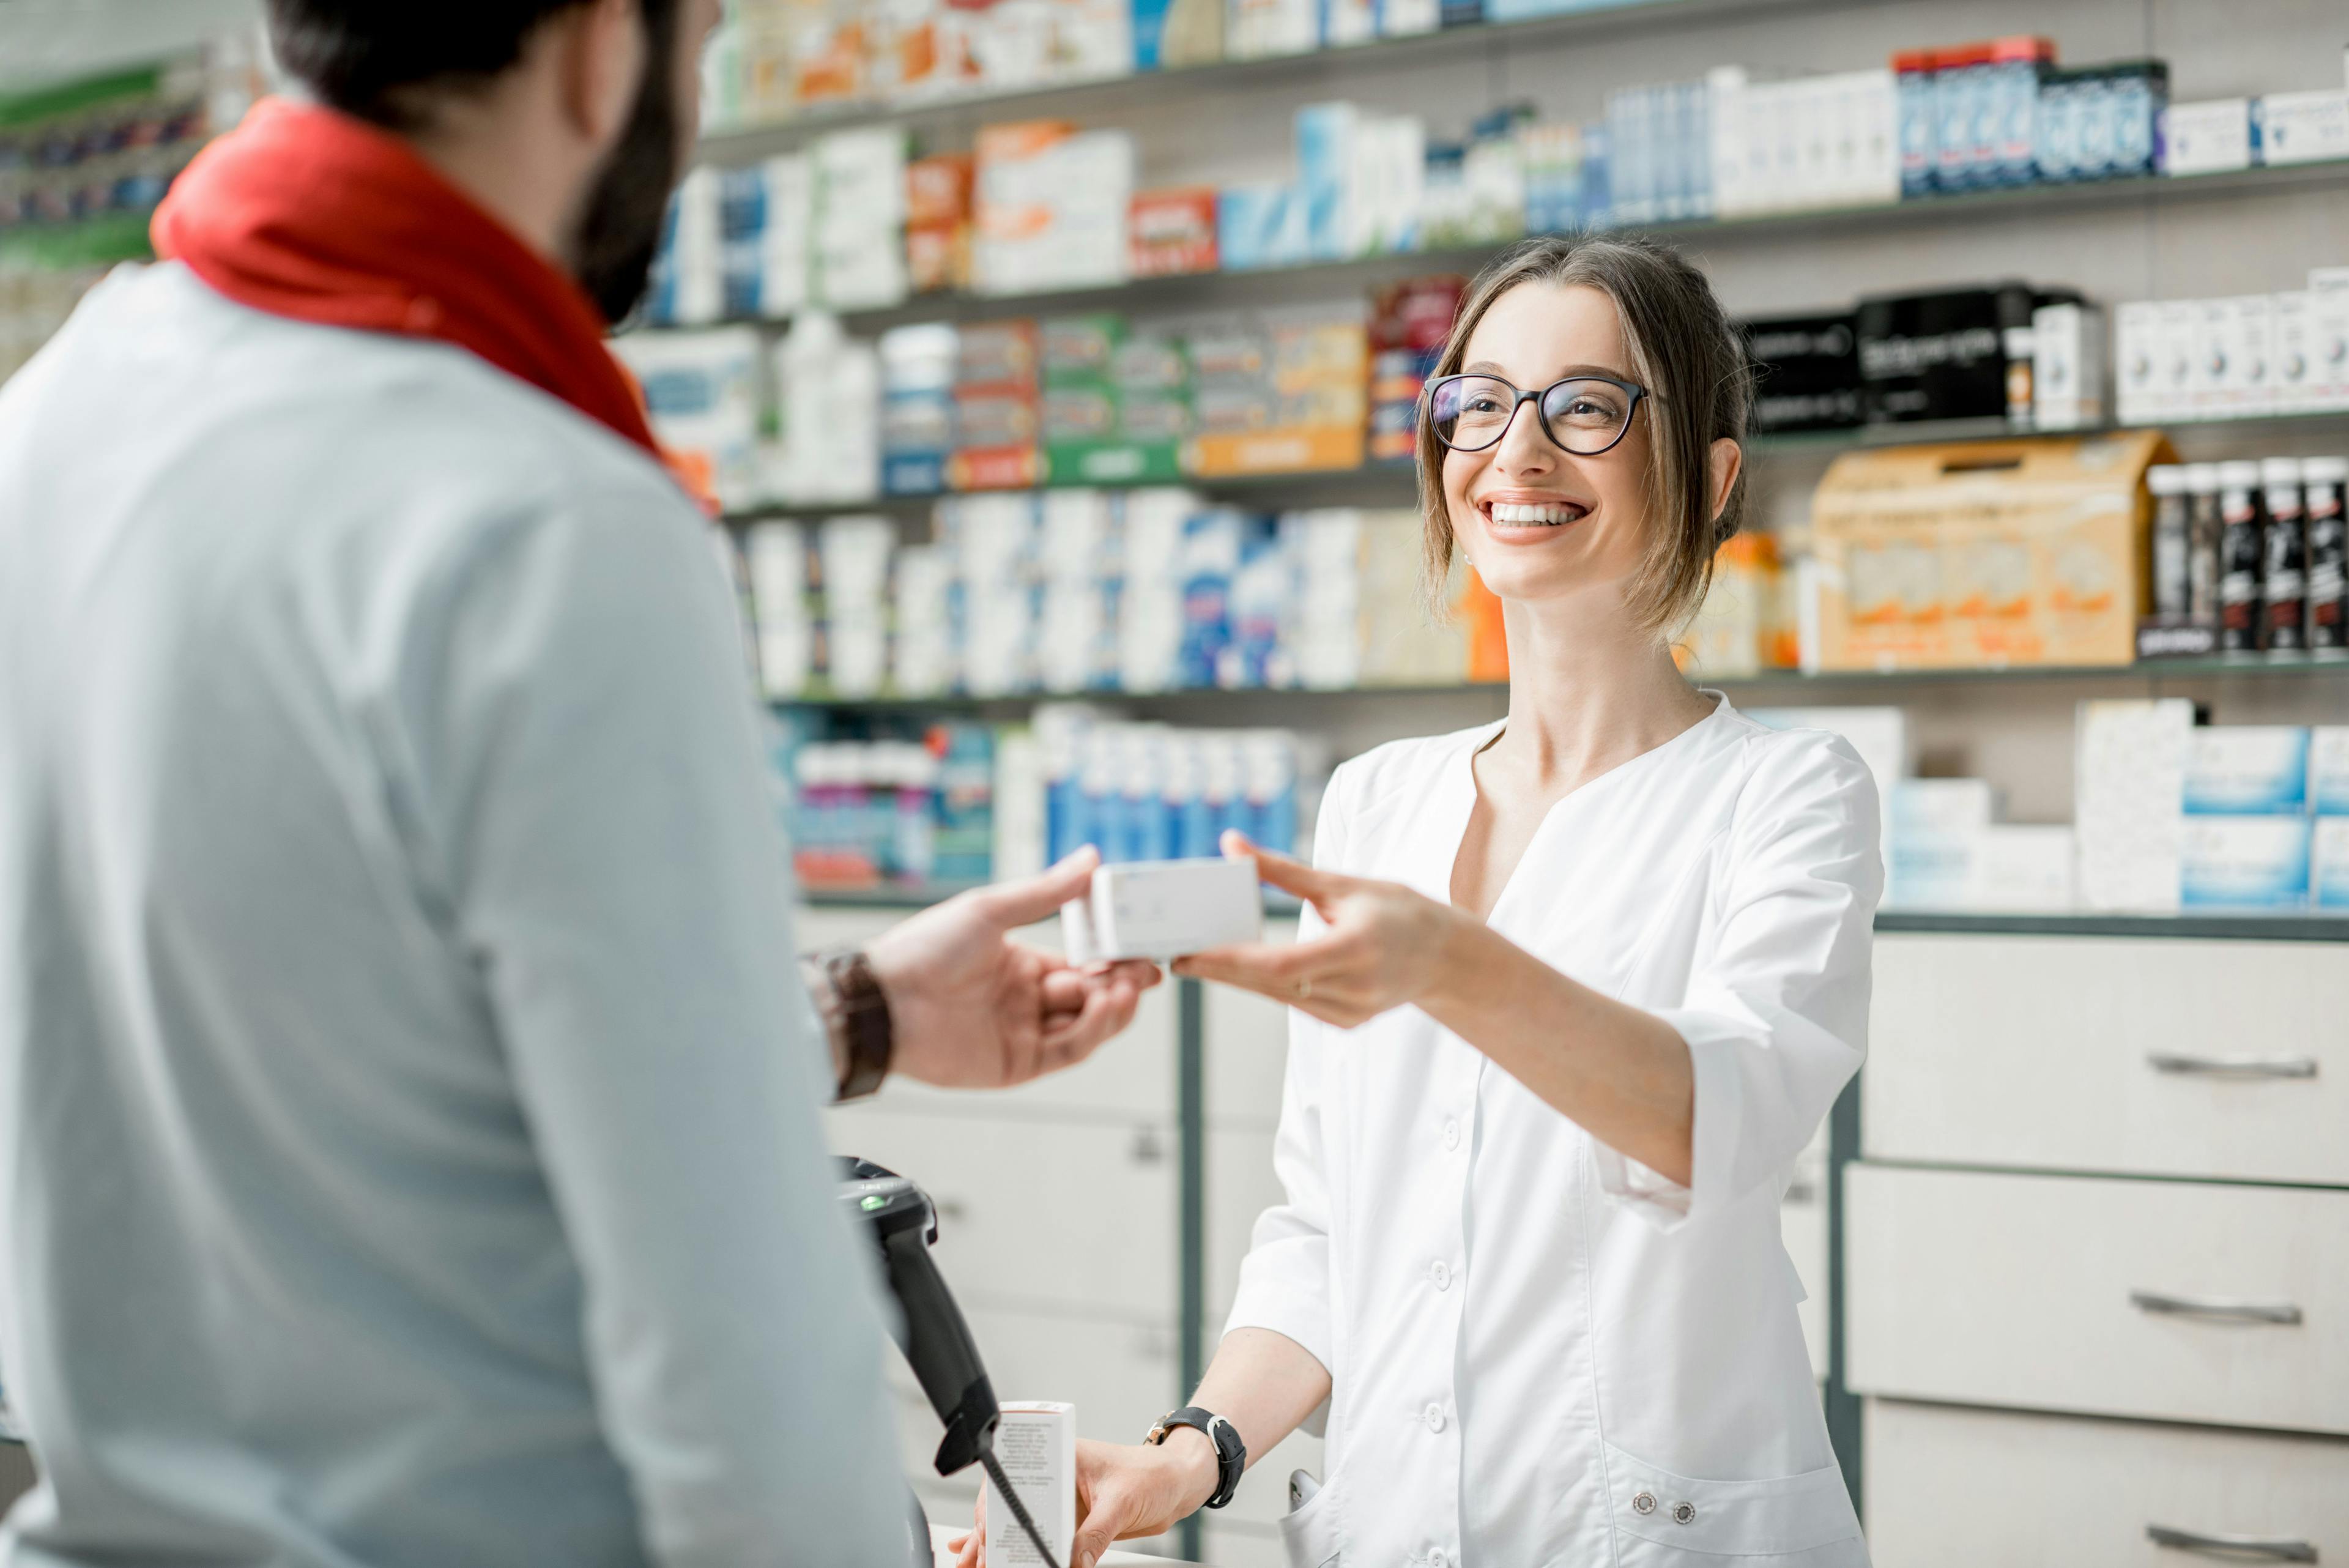 Attract New Patients, Increase Sales With These Pharmacy Remodeling Tips